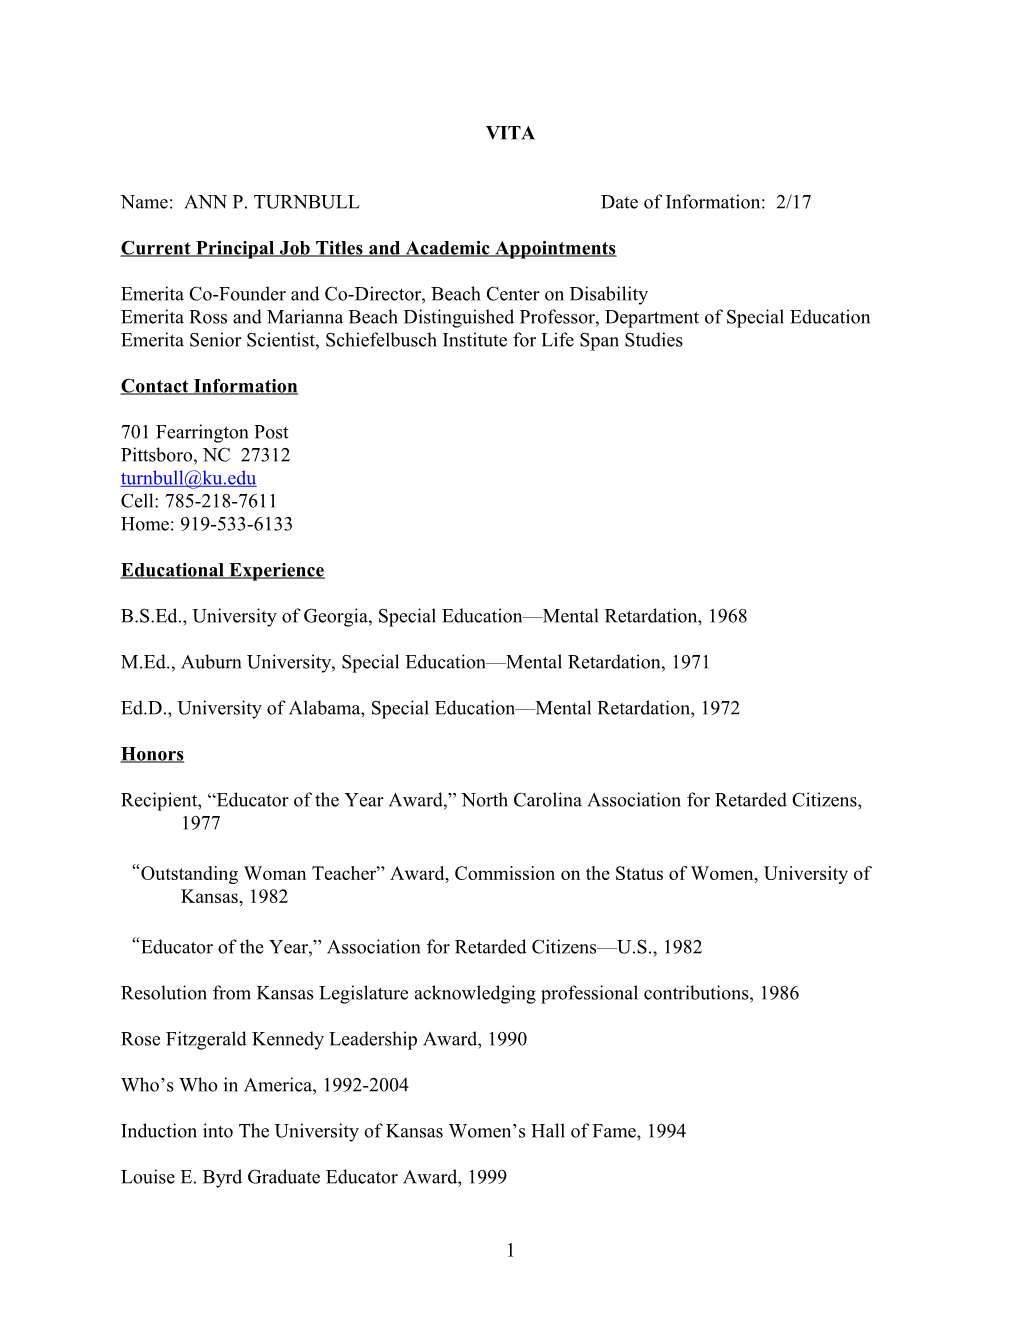 Current Principal Job Titles and Academic Appointments